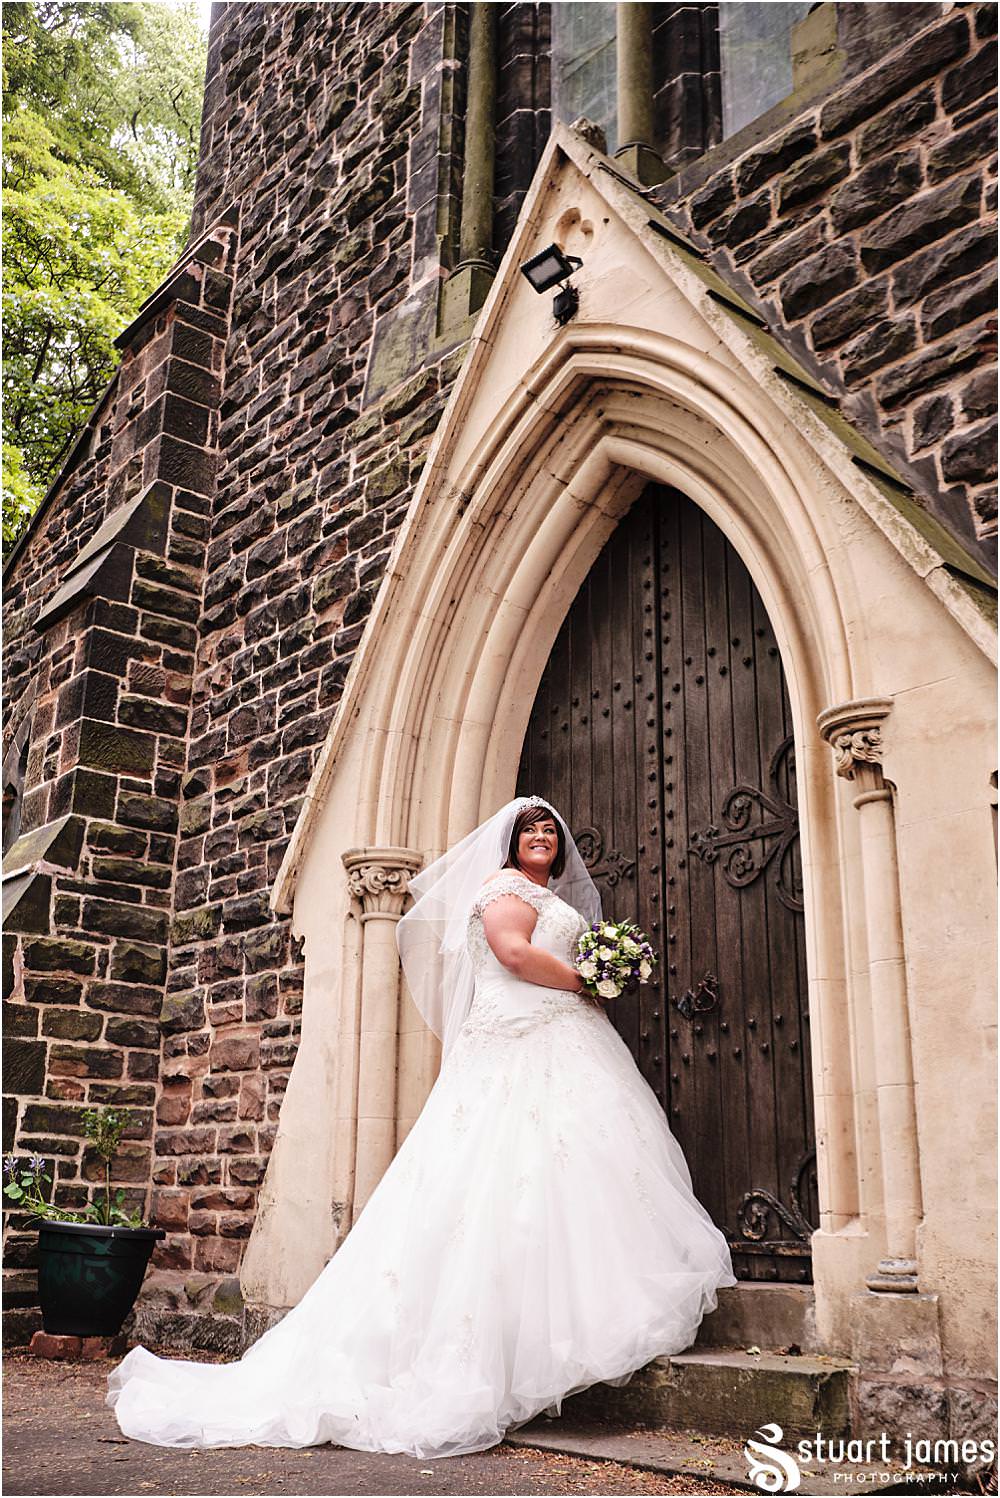 Bride poses for outside portrait at Holy Trinity Church in Eccleshall, photo by Stuart James Photography at Holy Trinity Church, Eccleshall